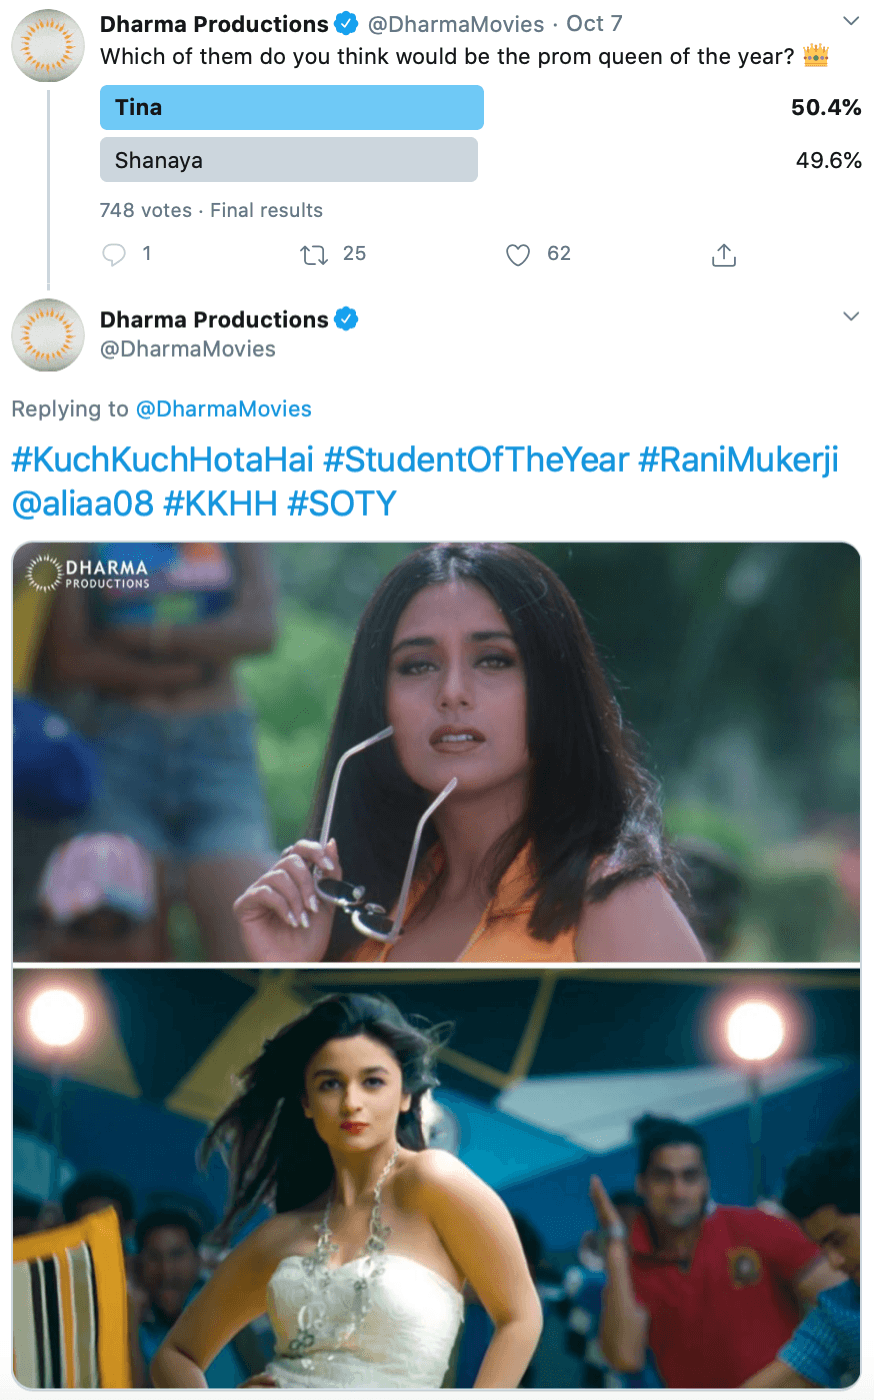 Twitter poll by @DharmaMovies